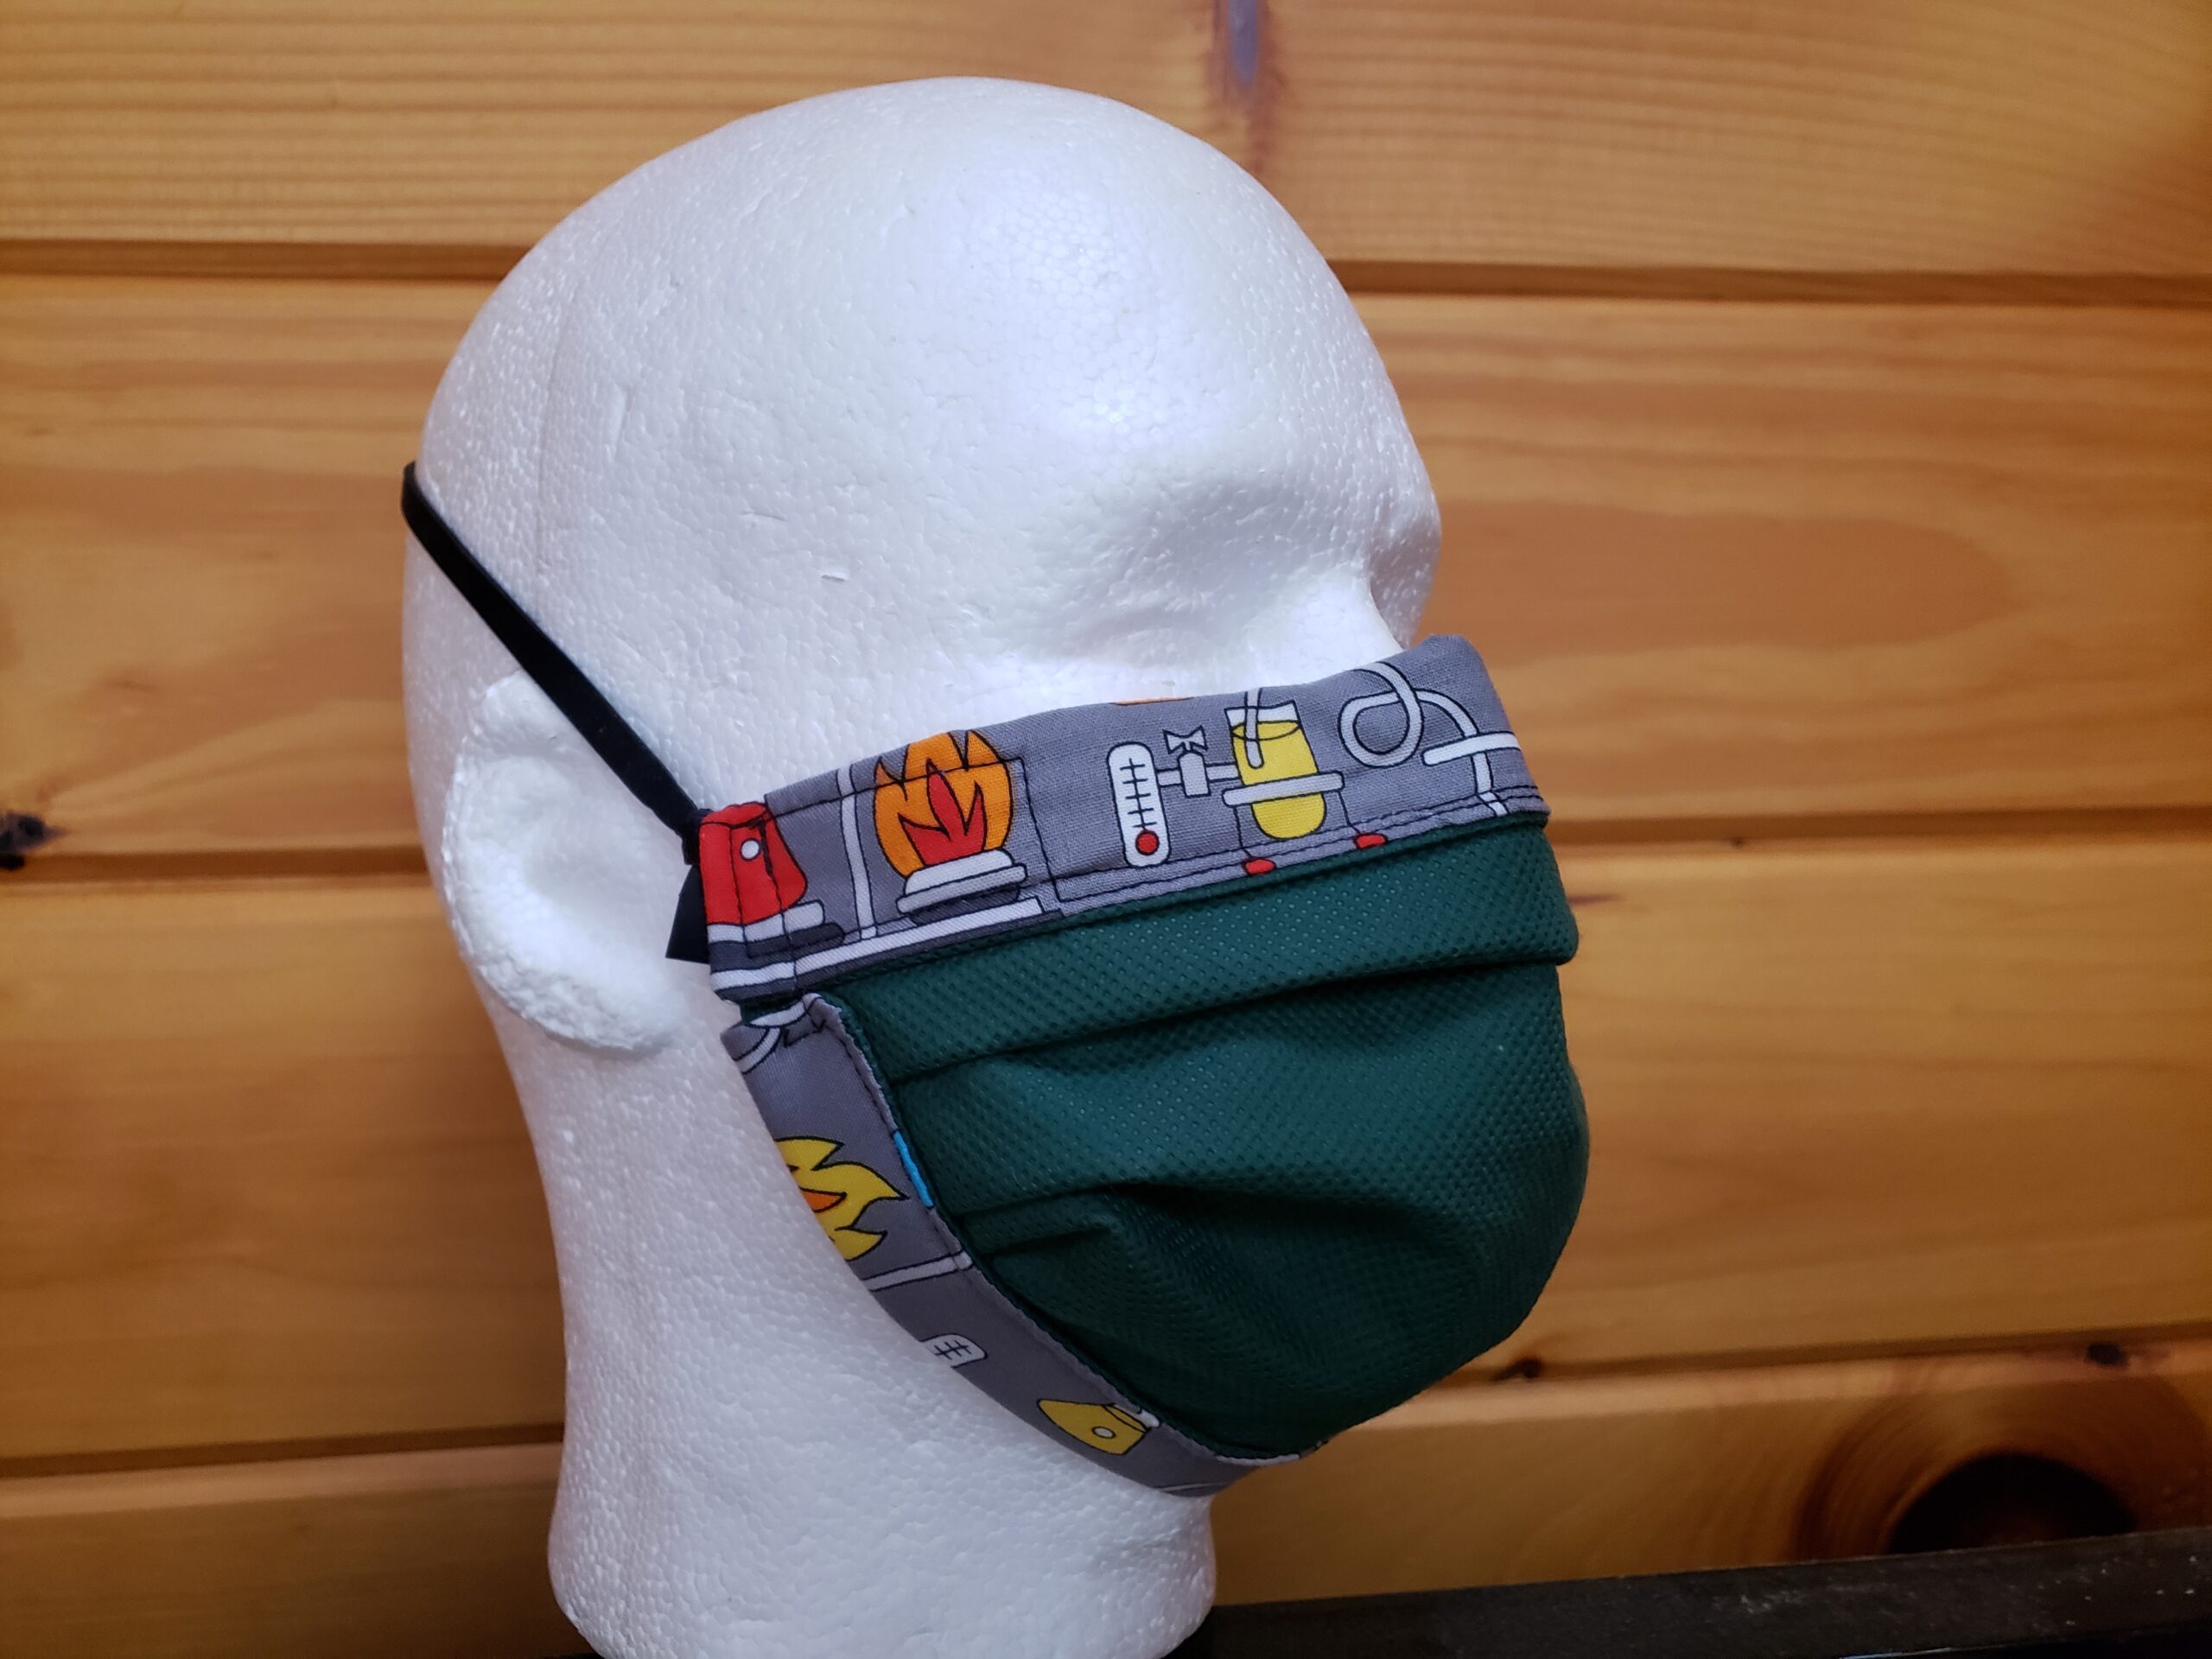 Photo of a 3-layer MakerMask:Origami fitted mask constructed from nonwoven polypropylene and tightly woven cotton